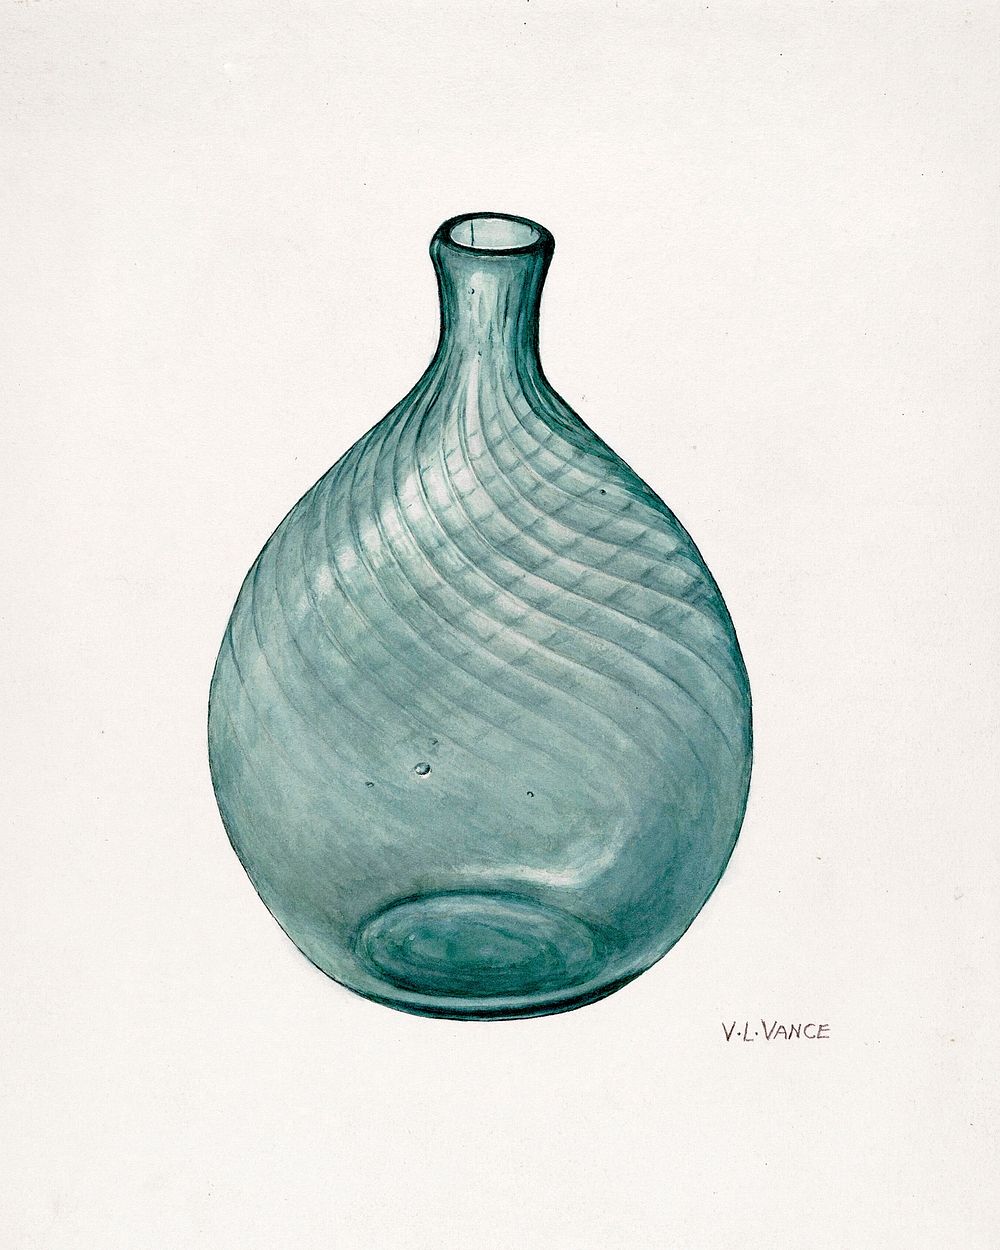 Flask (ca. 1941) by V.L. Vance. Original from The National Gallery of Art. Digitally enhanced by rawpixel.